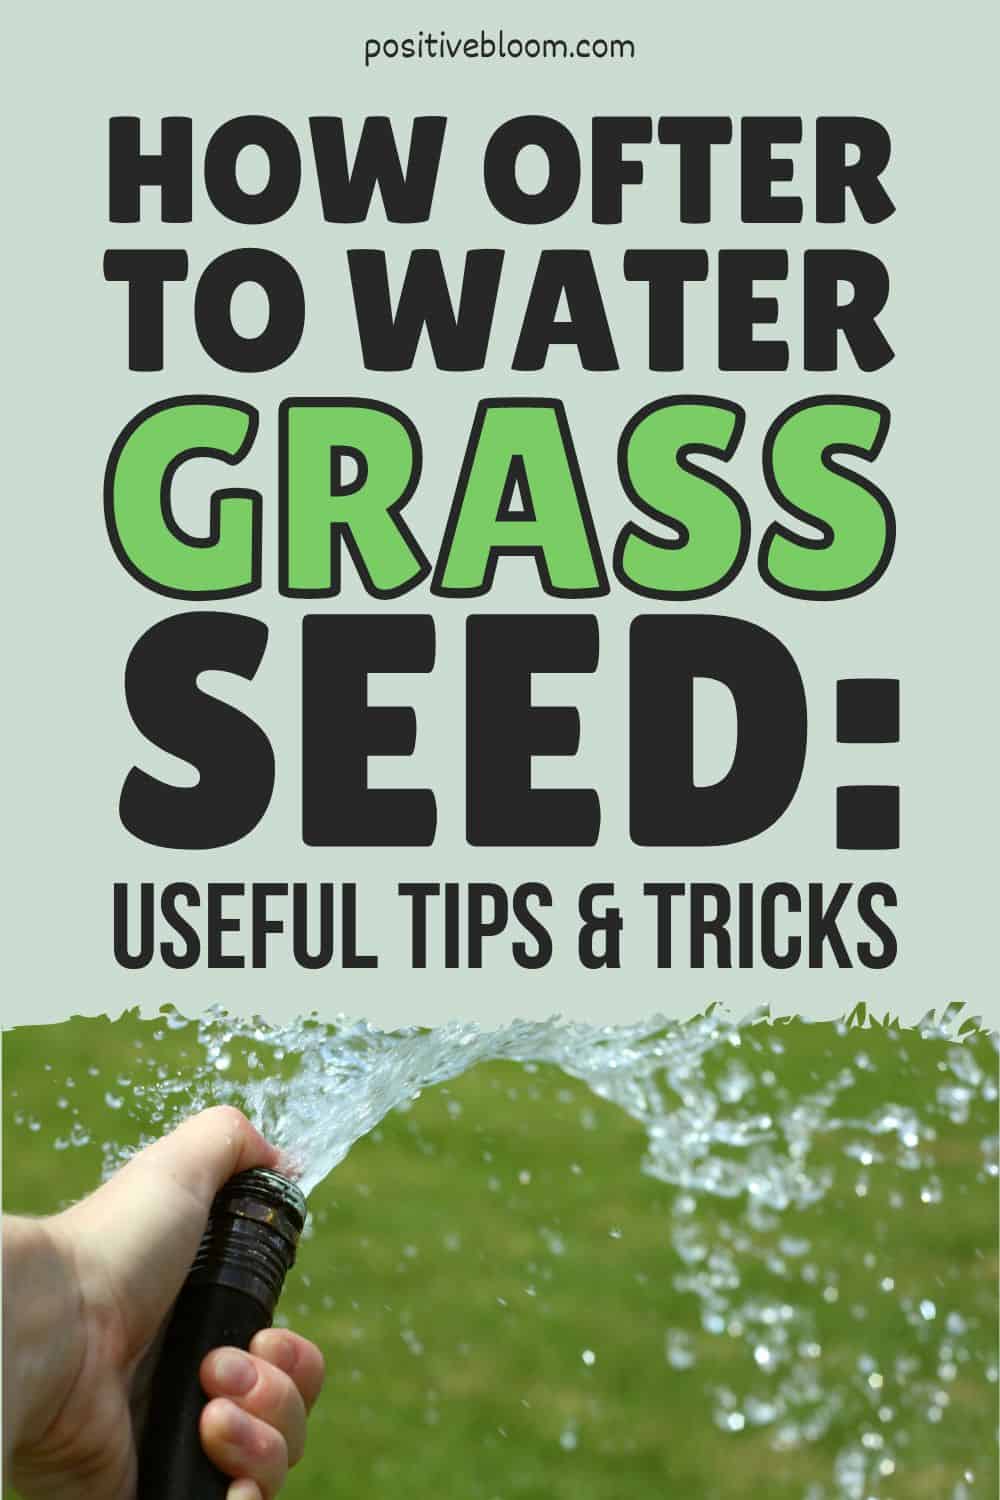 How Often To Water Grass Seed Useful Tips And Tricks Pinterest